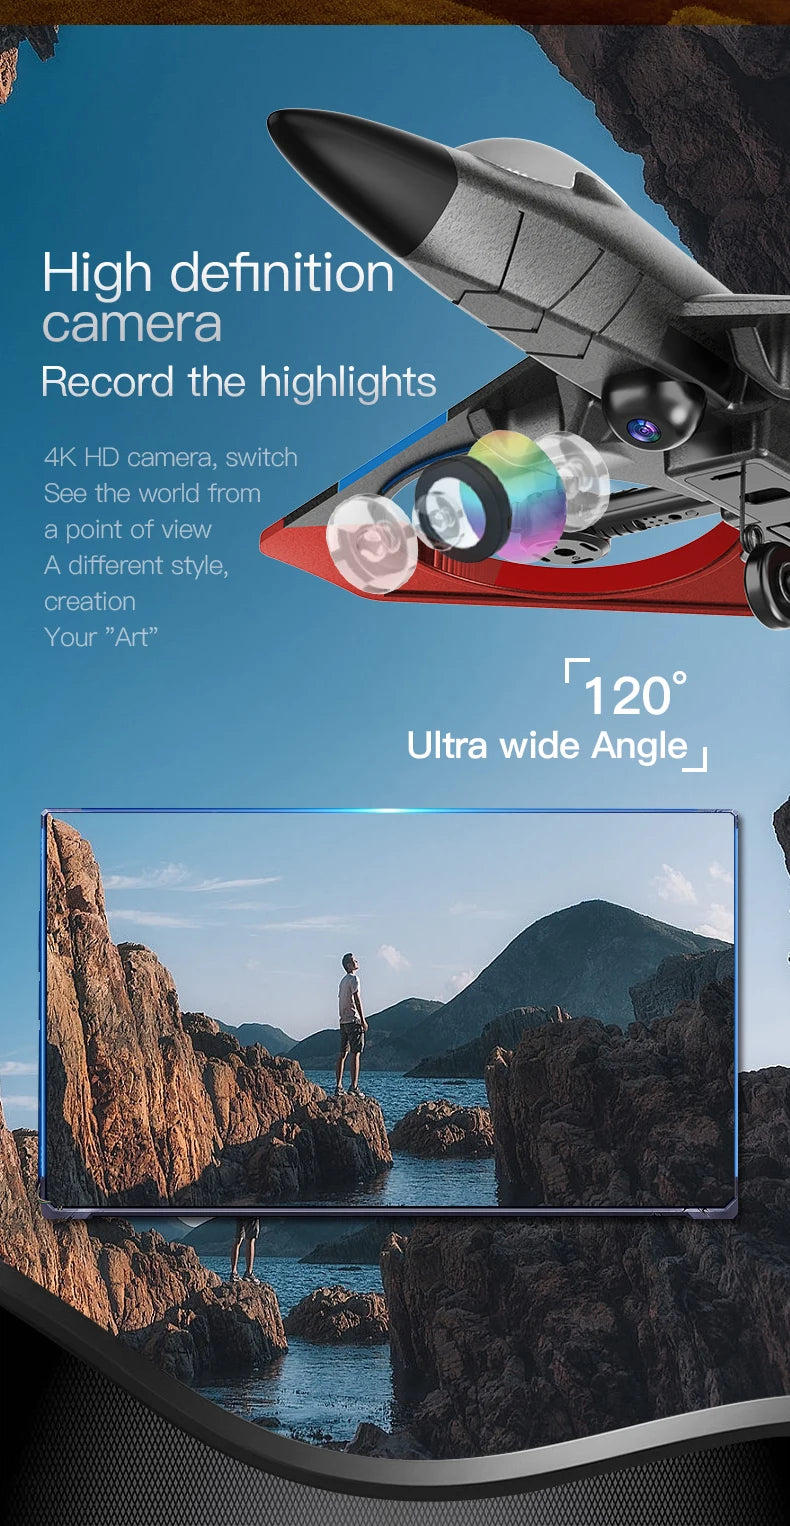 V27 RC Airplane, high definition camera Record the highlights 4k HD camera, switch See the world from point of view